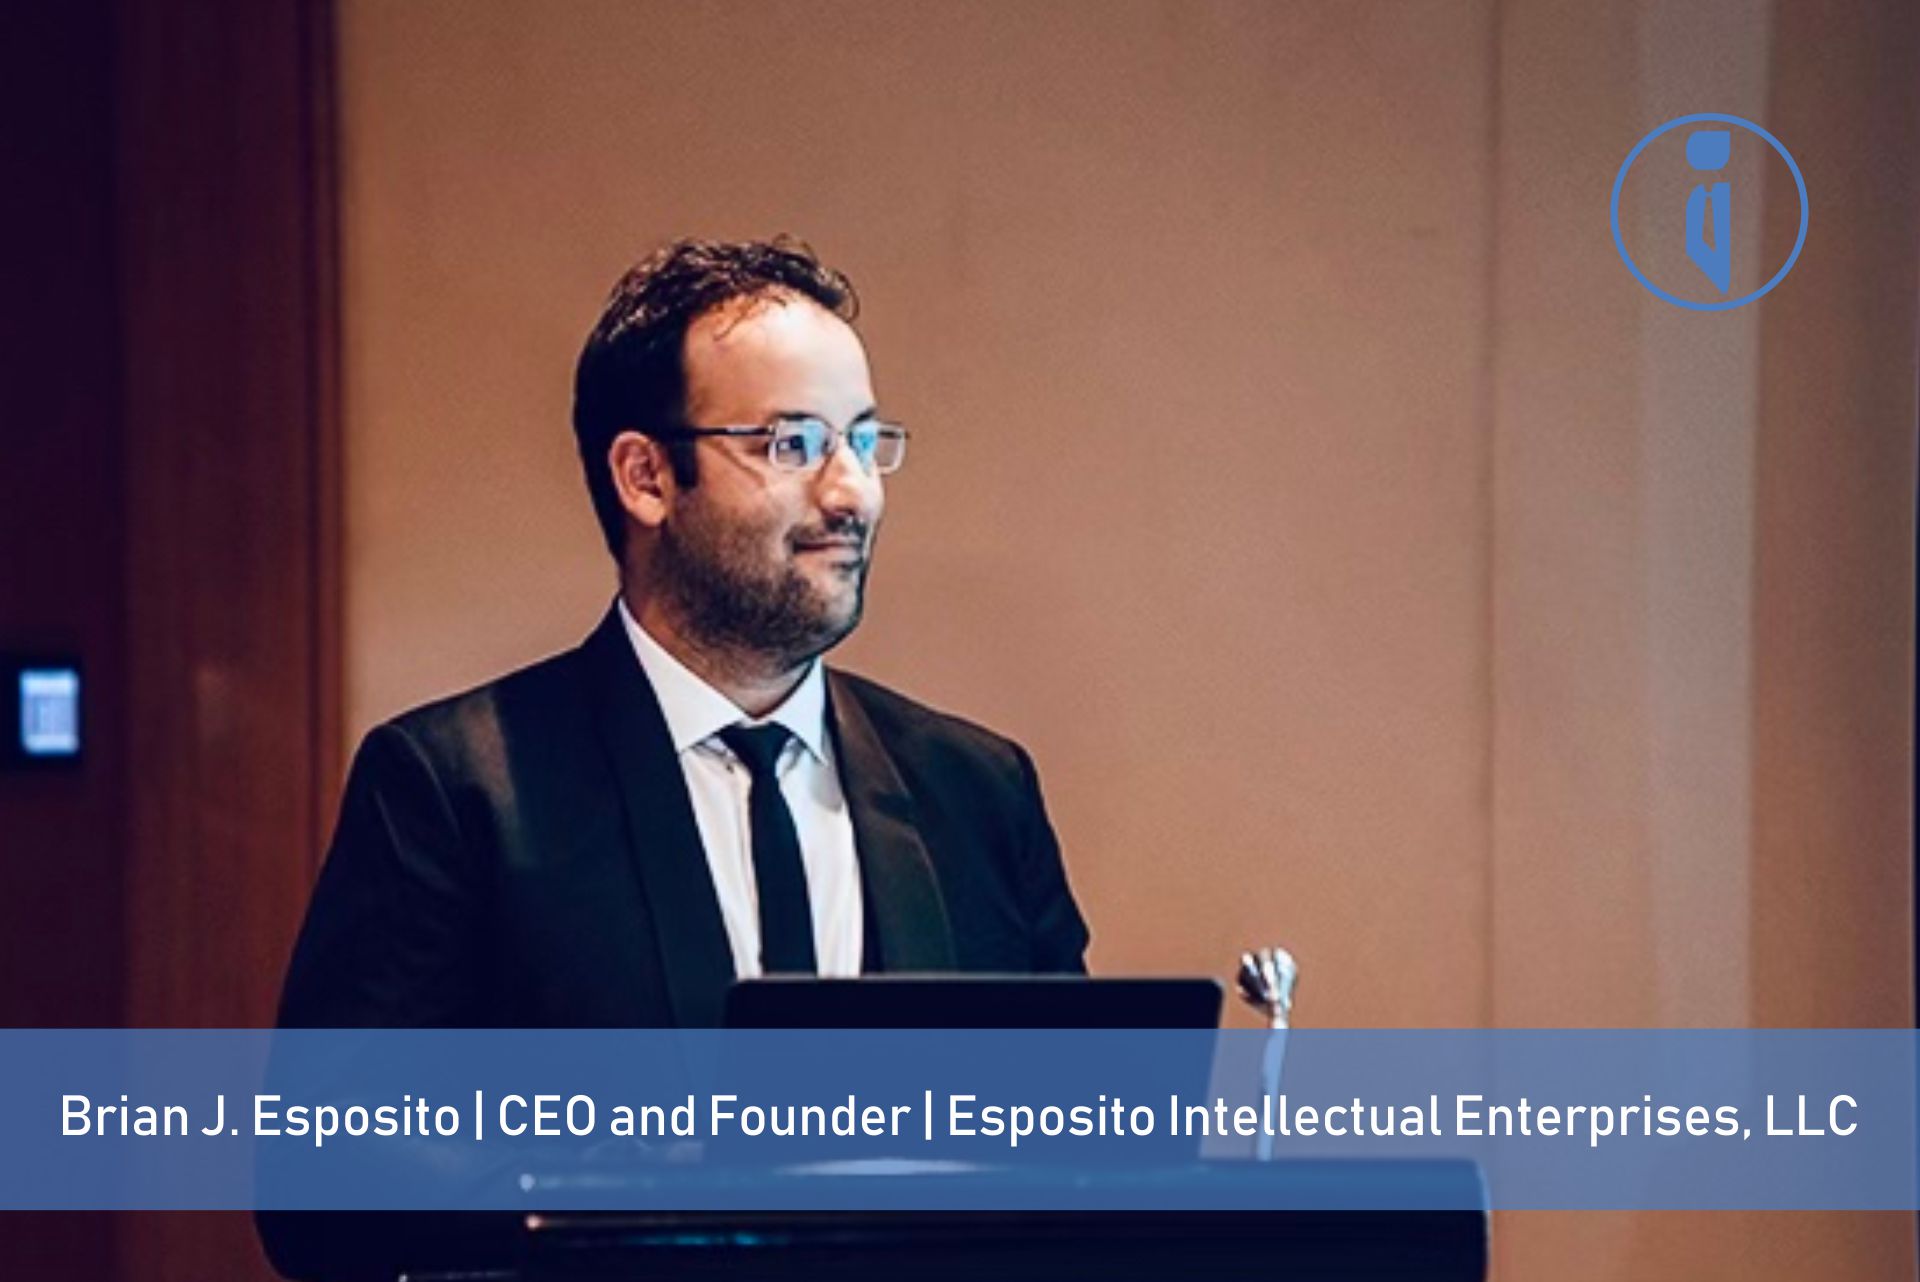 Esposito Intellectual Enterprises, LLC: A Story of the Transformation of a Start-up to a Business Venture